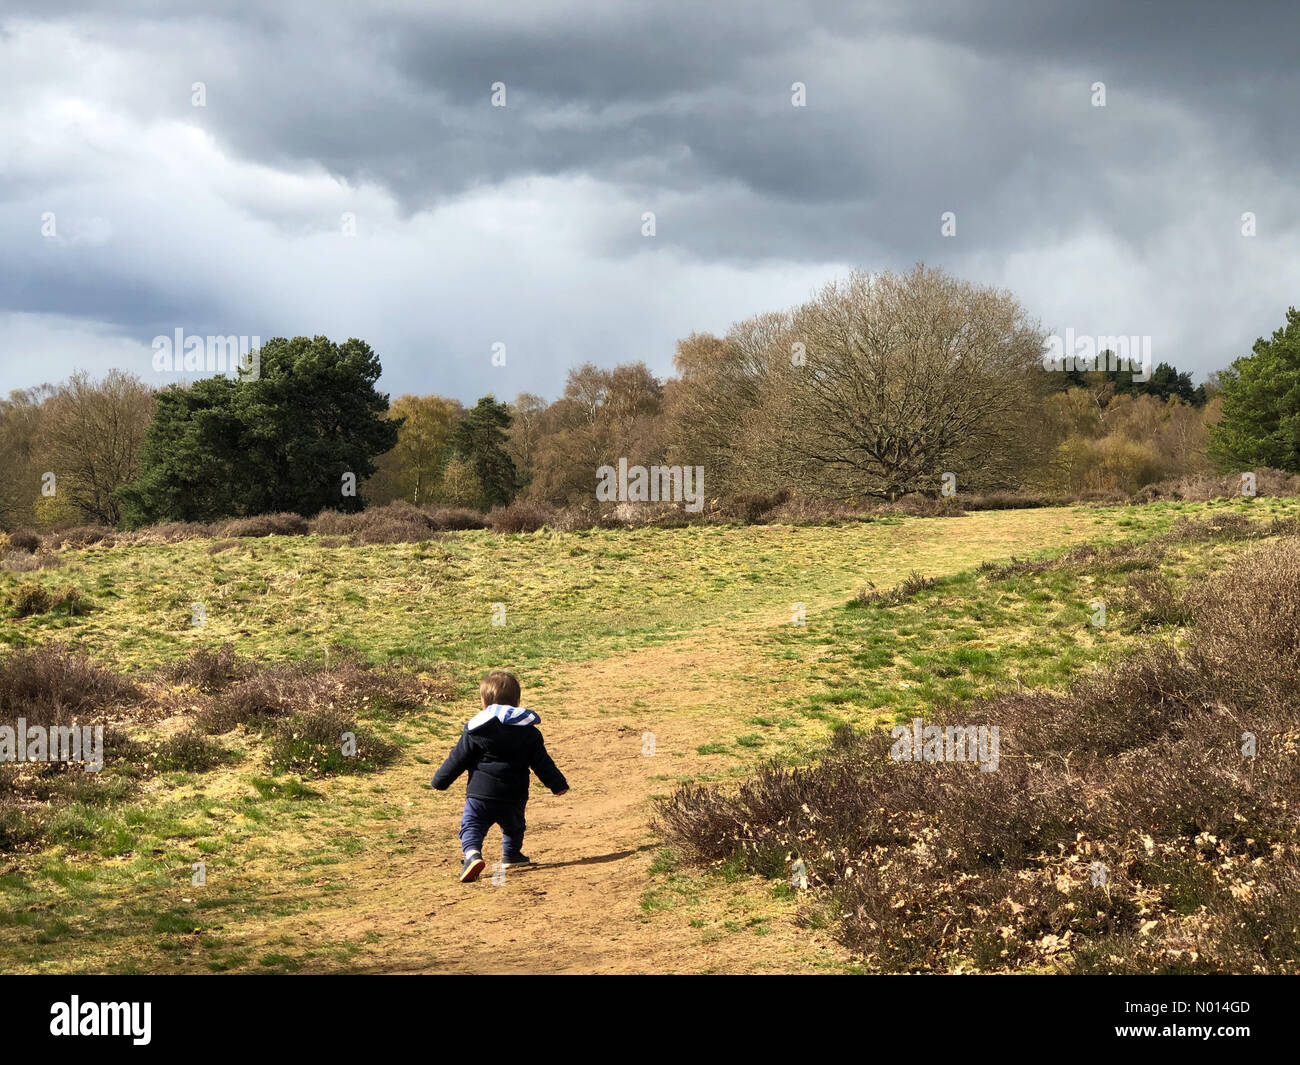 UK Weather: Cloudy in Godalming. Puttenham Common, Godalming. 06th April 2021. An unsettled afternoon for the Home Counties with wintry showers. Cloudy skies over Puttenham Common, Godalming, Surrey. Credit: jamesjagger/StockimoNews/Alamy Live News Stock Photo